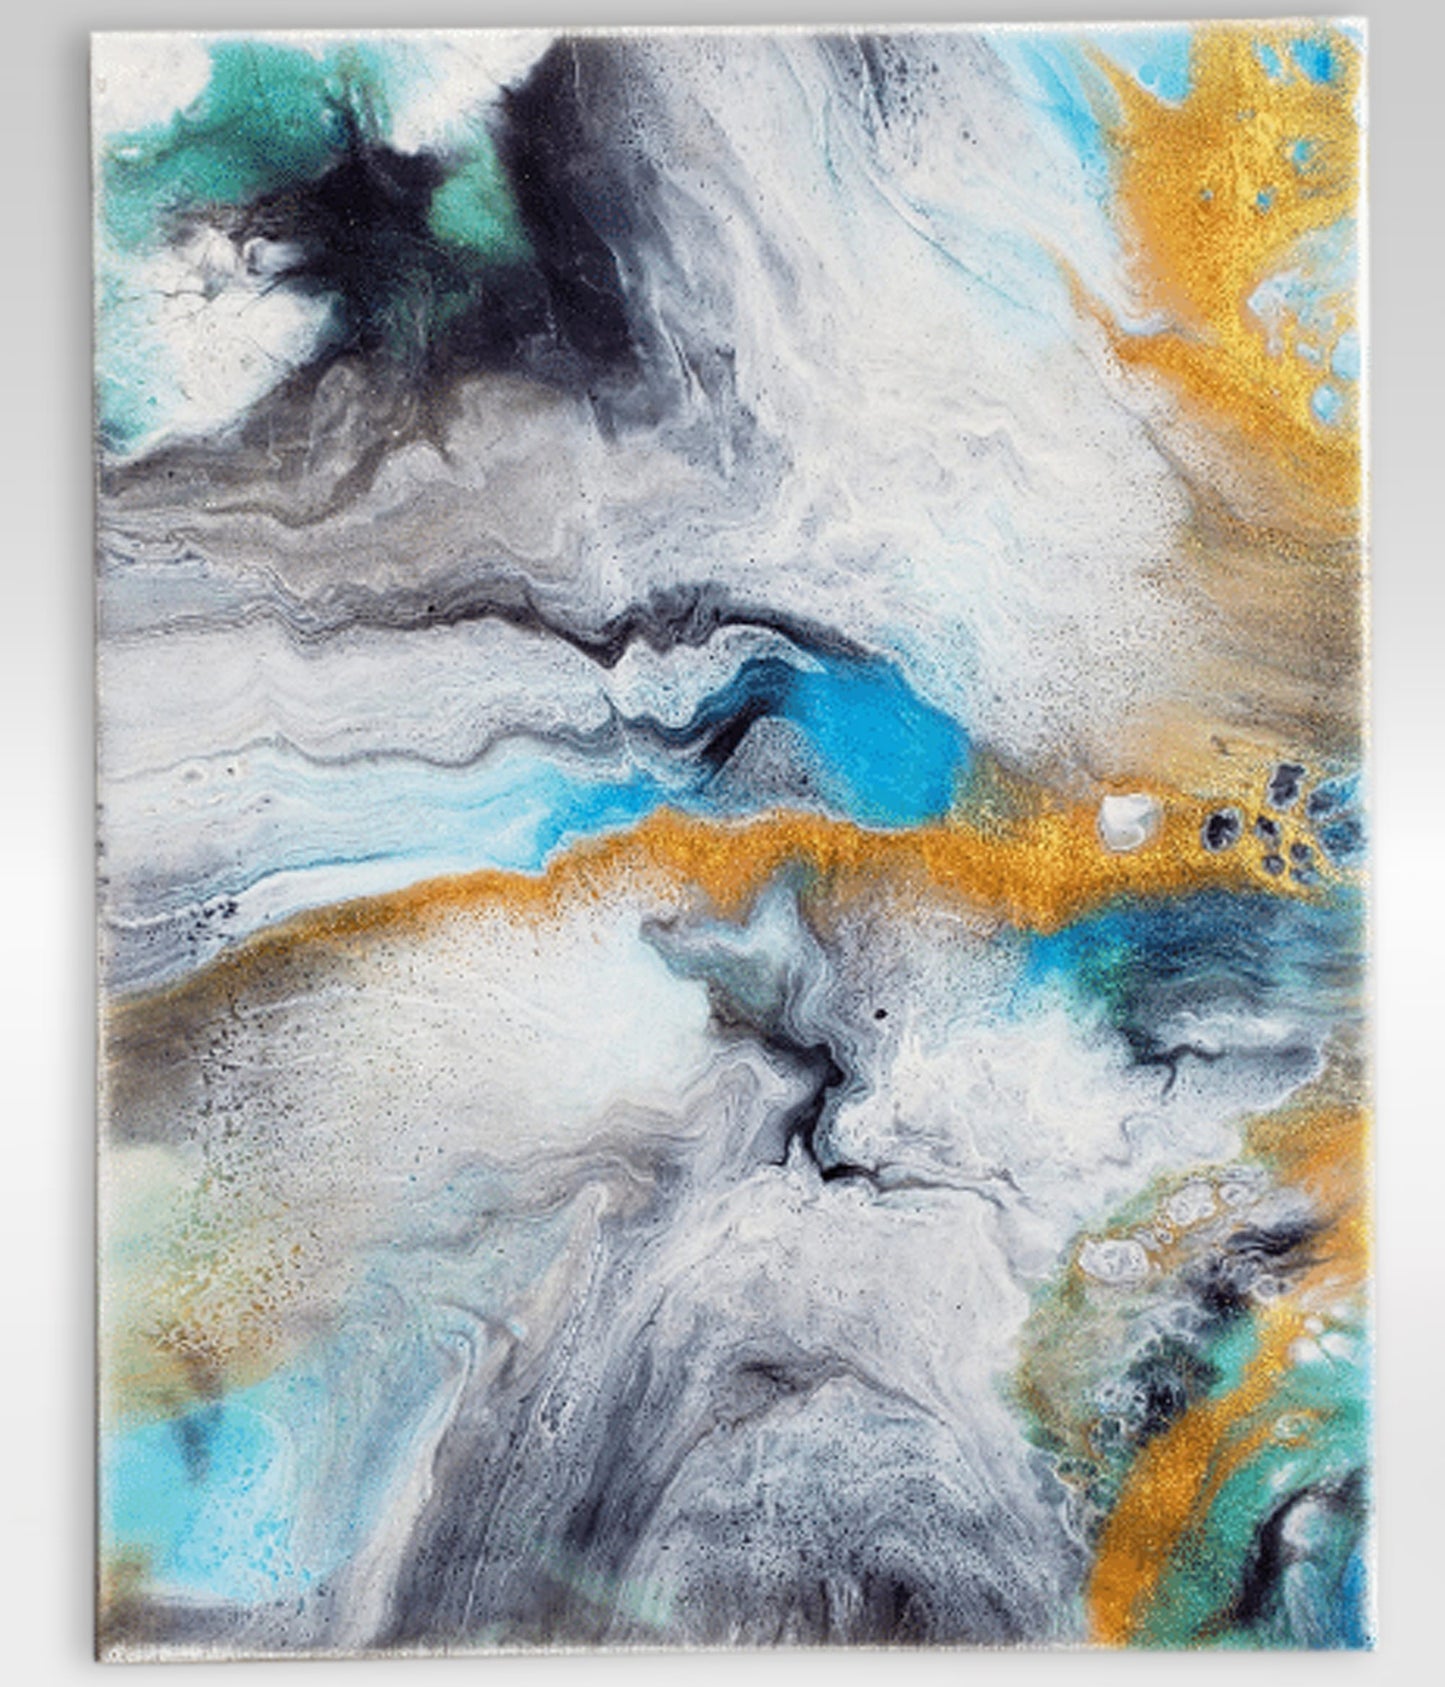 Smurfy – 11 x 14 Resin Painting On Canvas